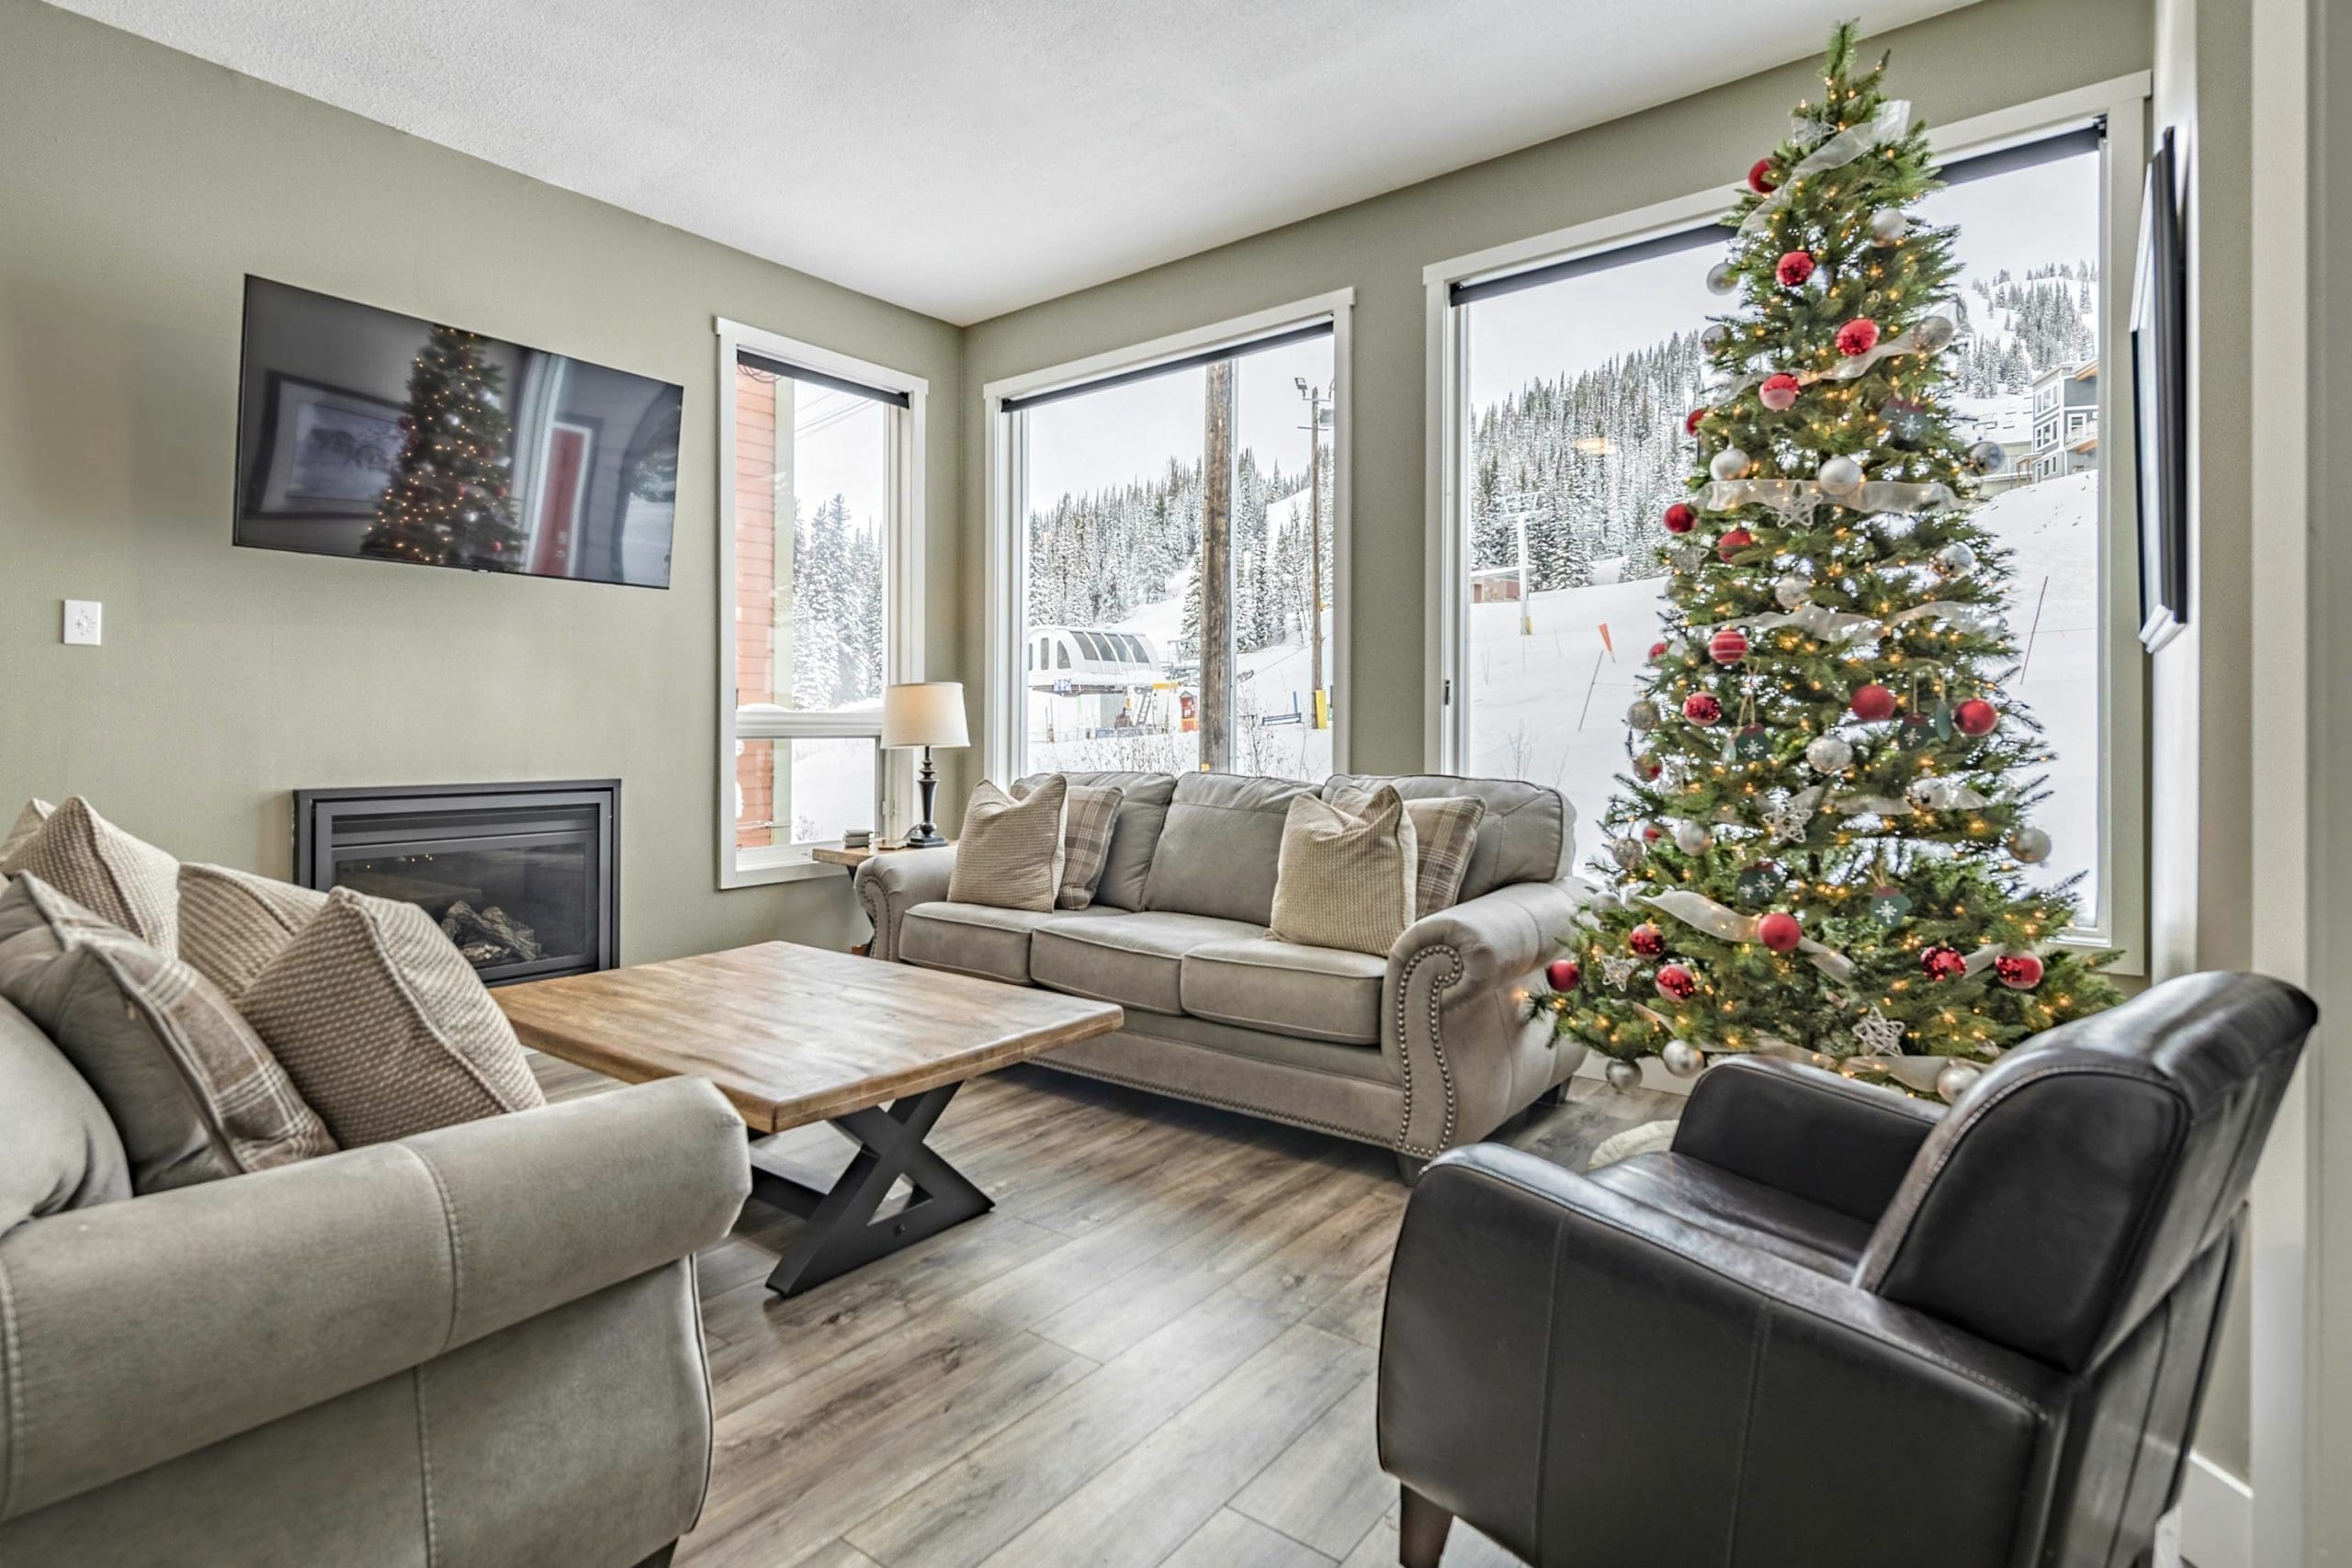 Upper Living Room with incredible views of the Alpine mountains. Private roof top hot tub and pet-friendly!